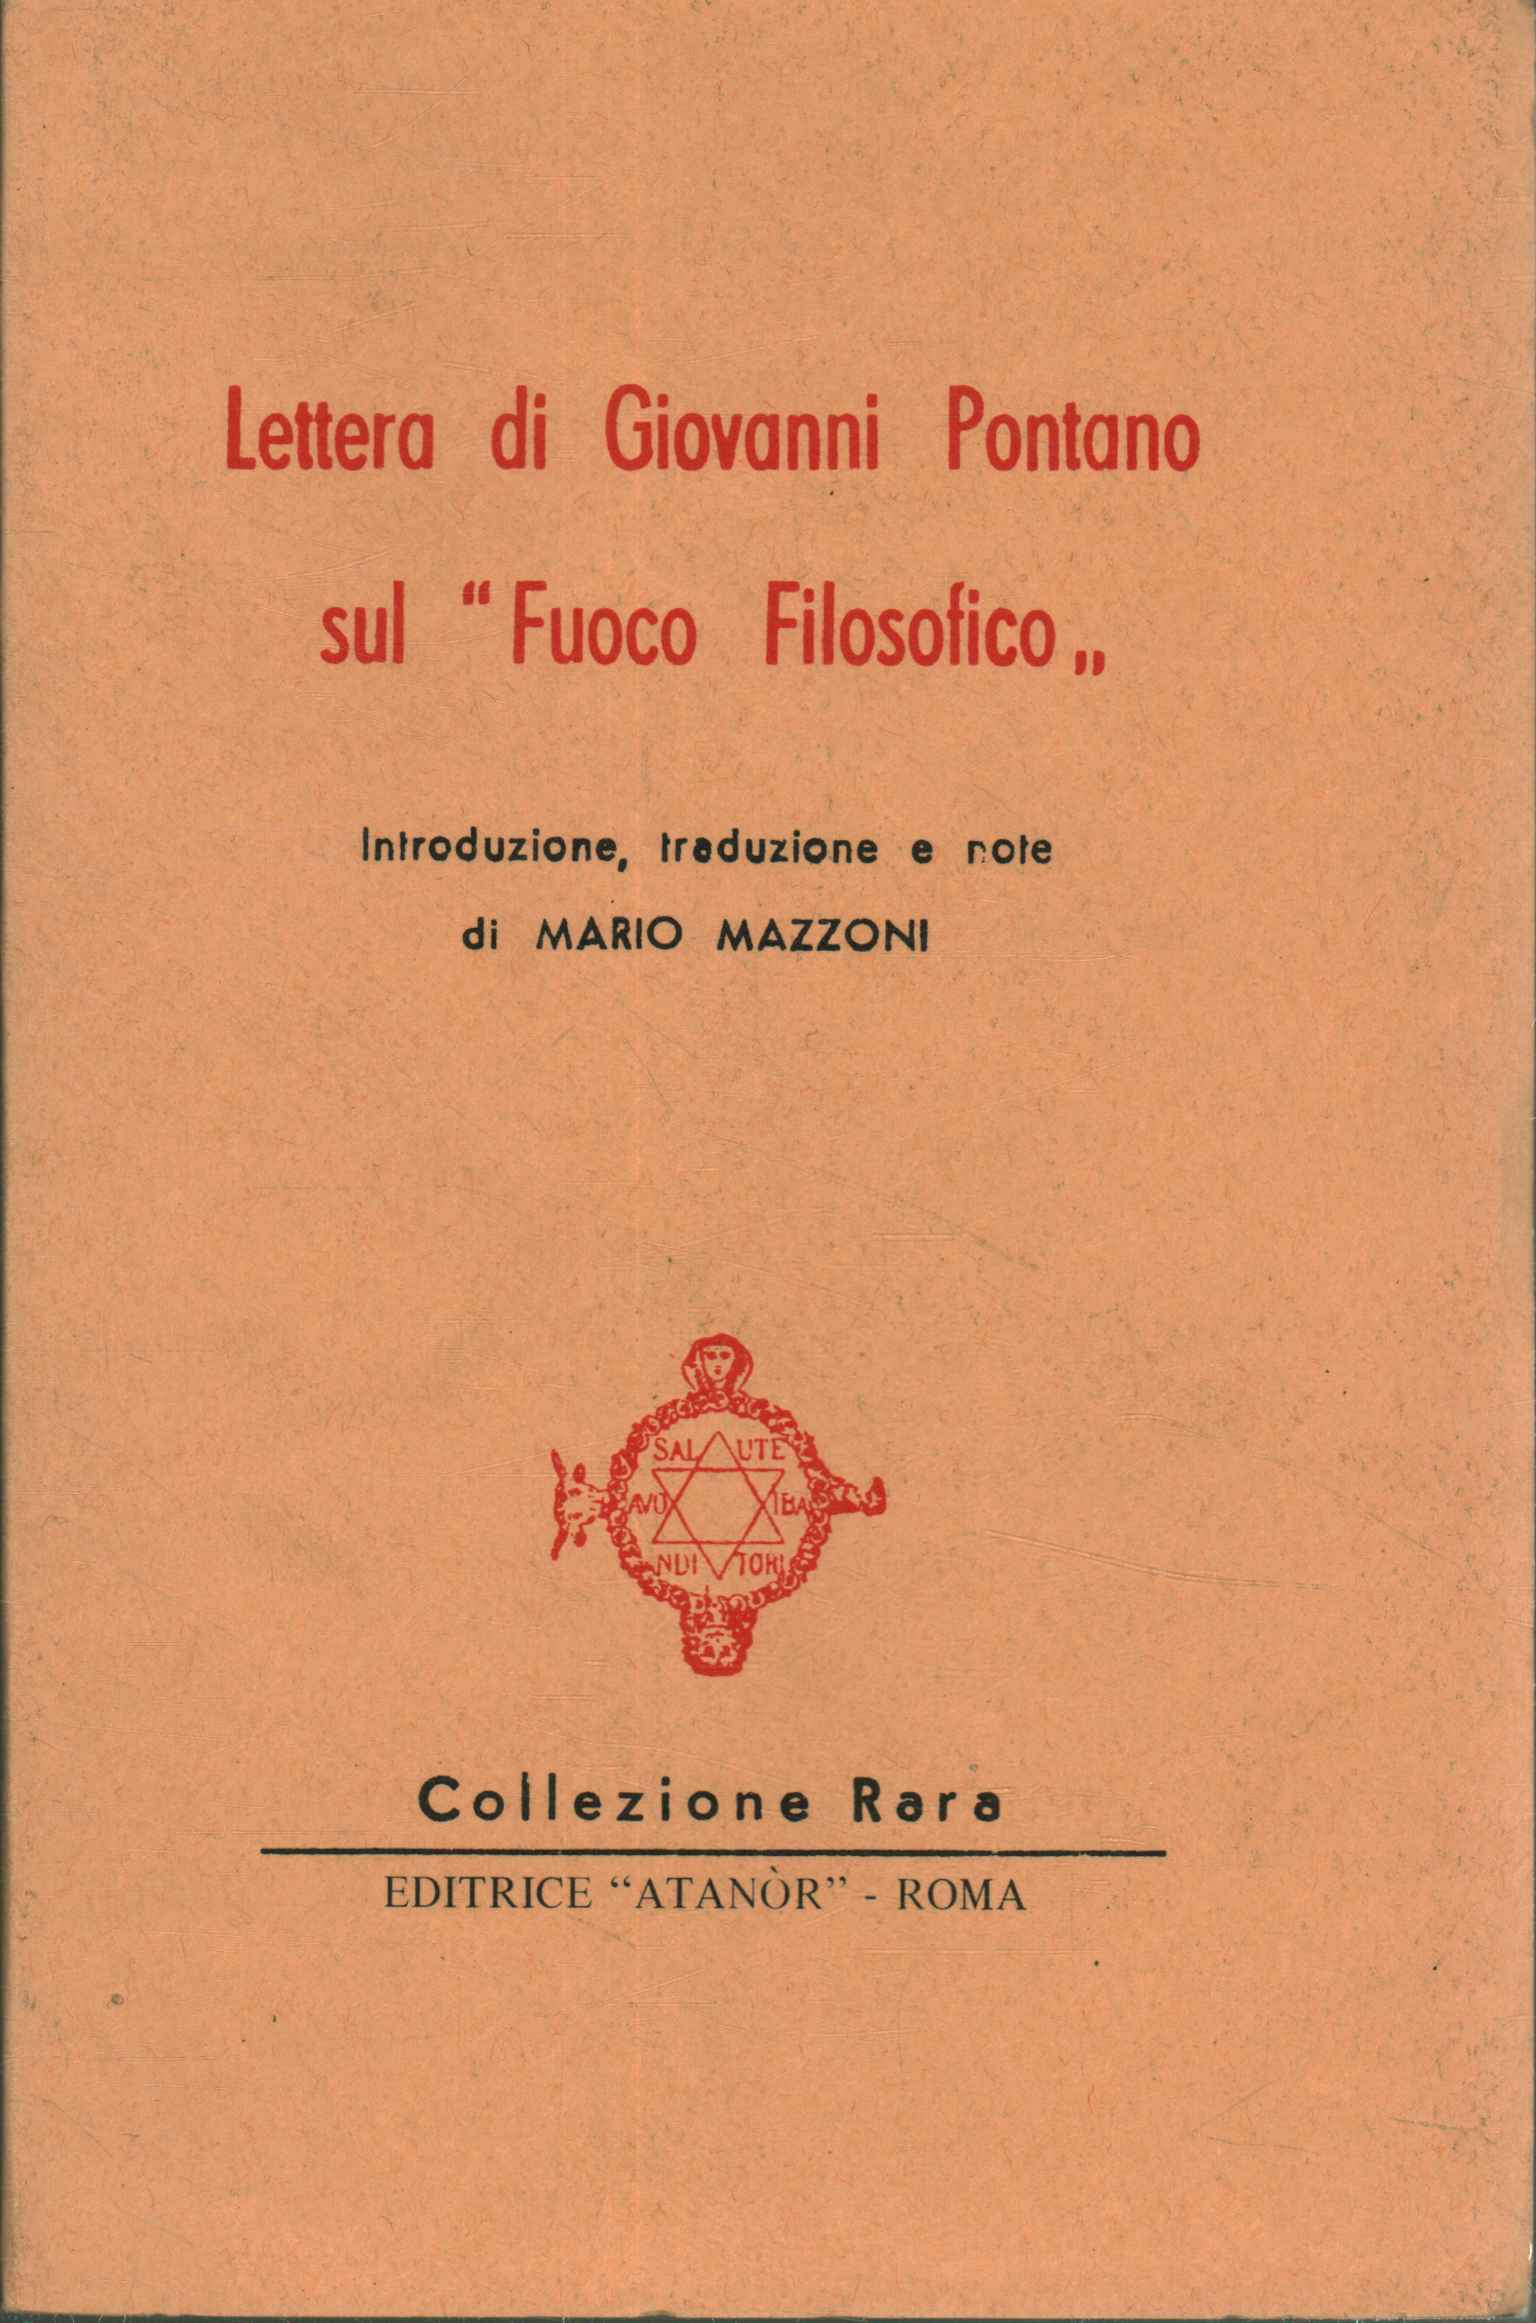 Letter from Giovanni Pontano on Fire